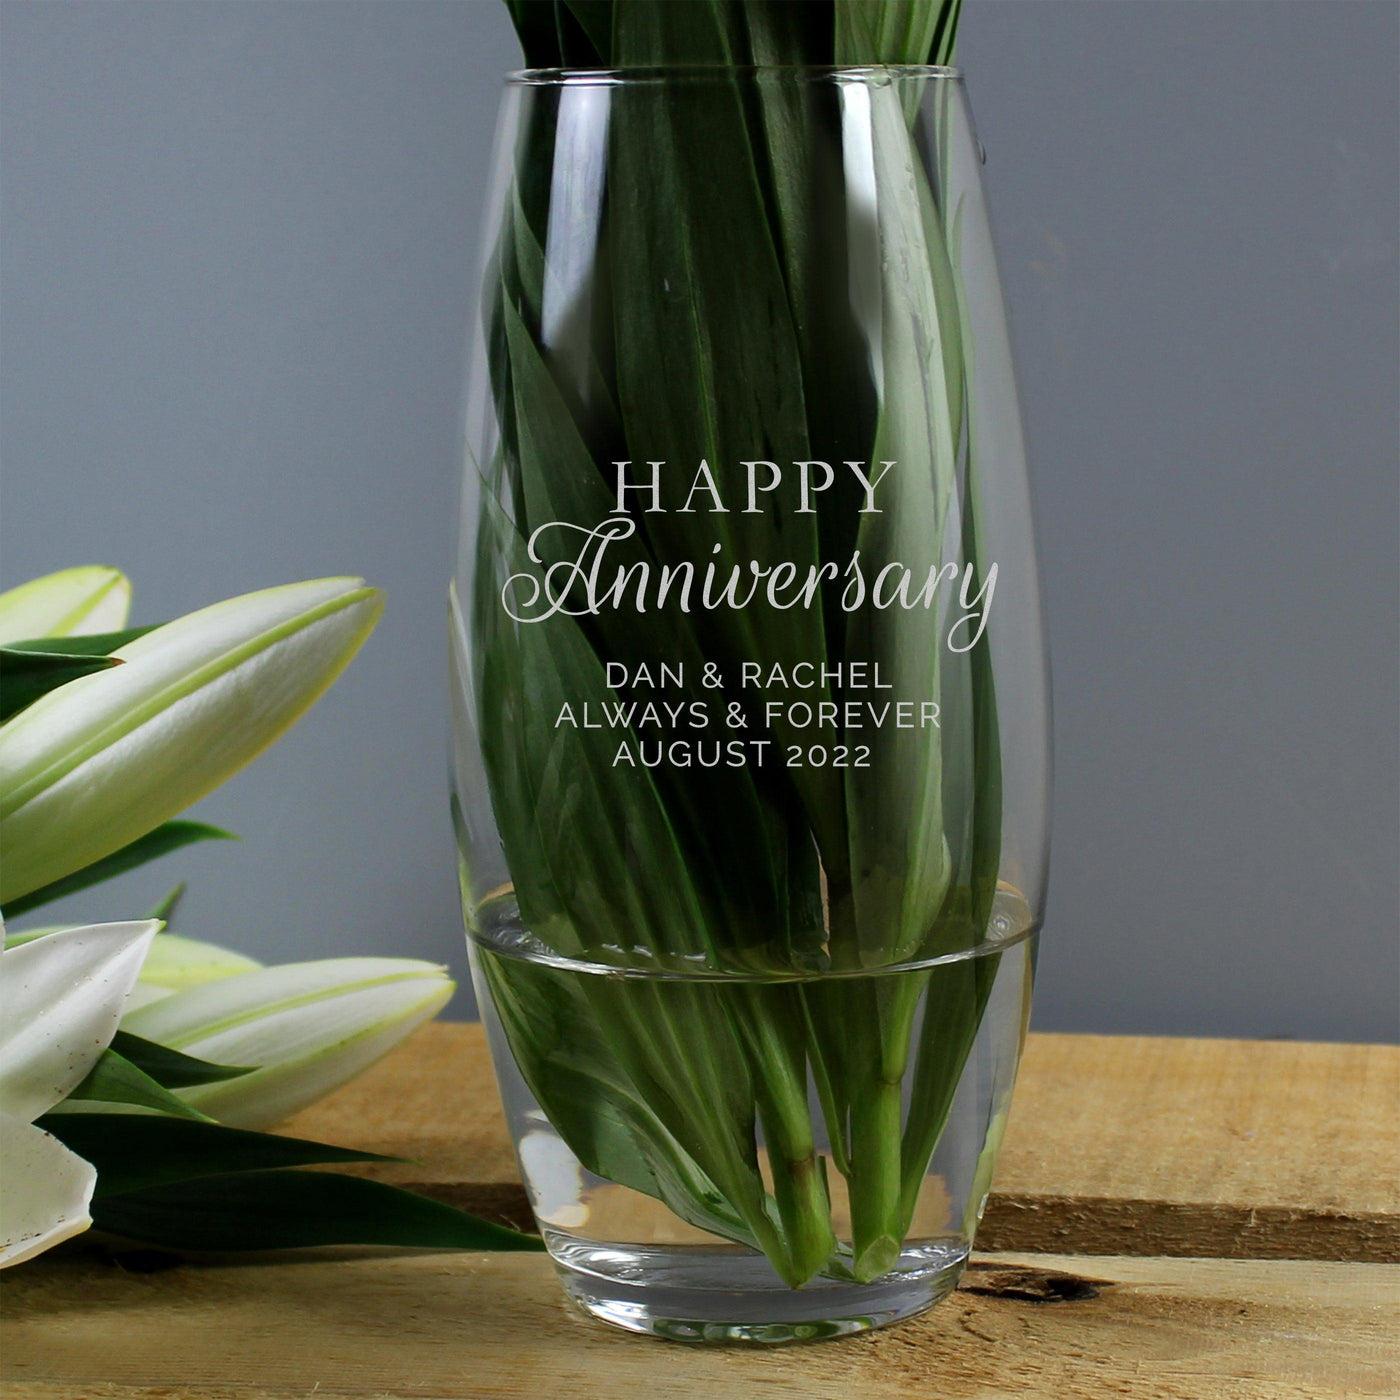 Personalised 'Happy Anniversary' Glass Bullet Vase - Shop Personalised Gifts